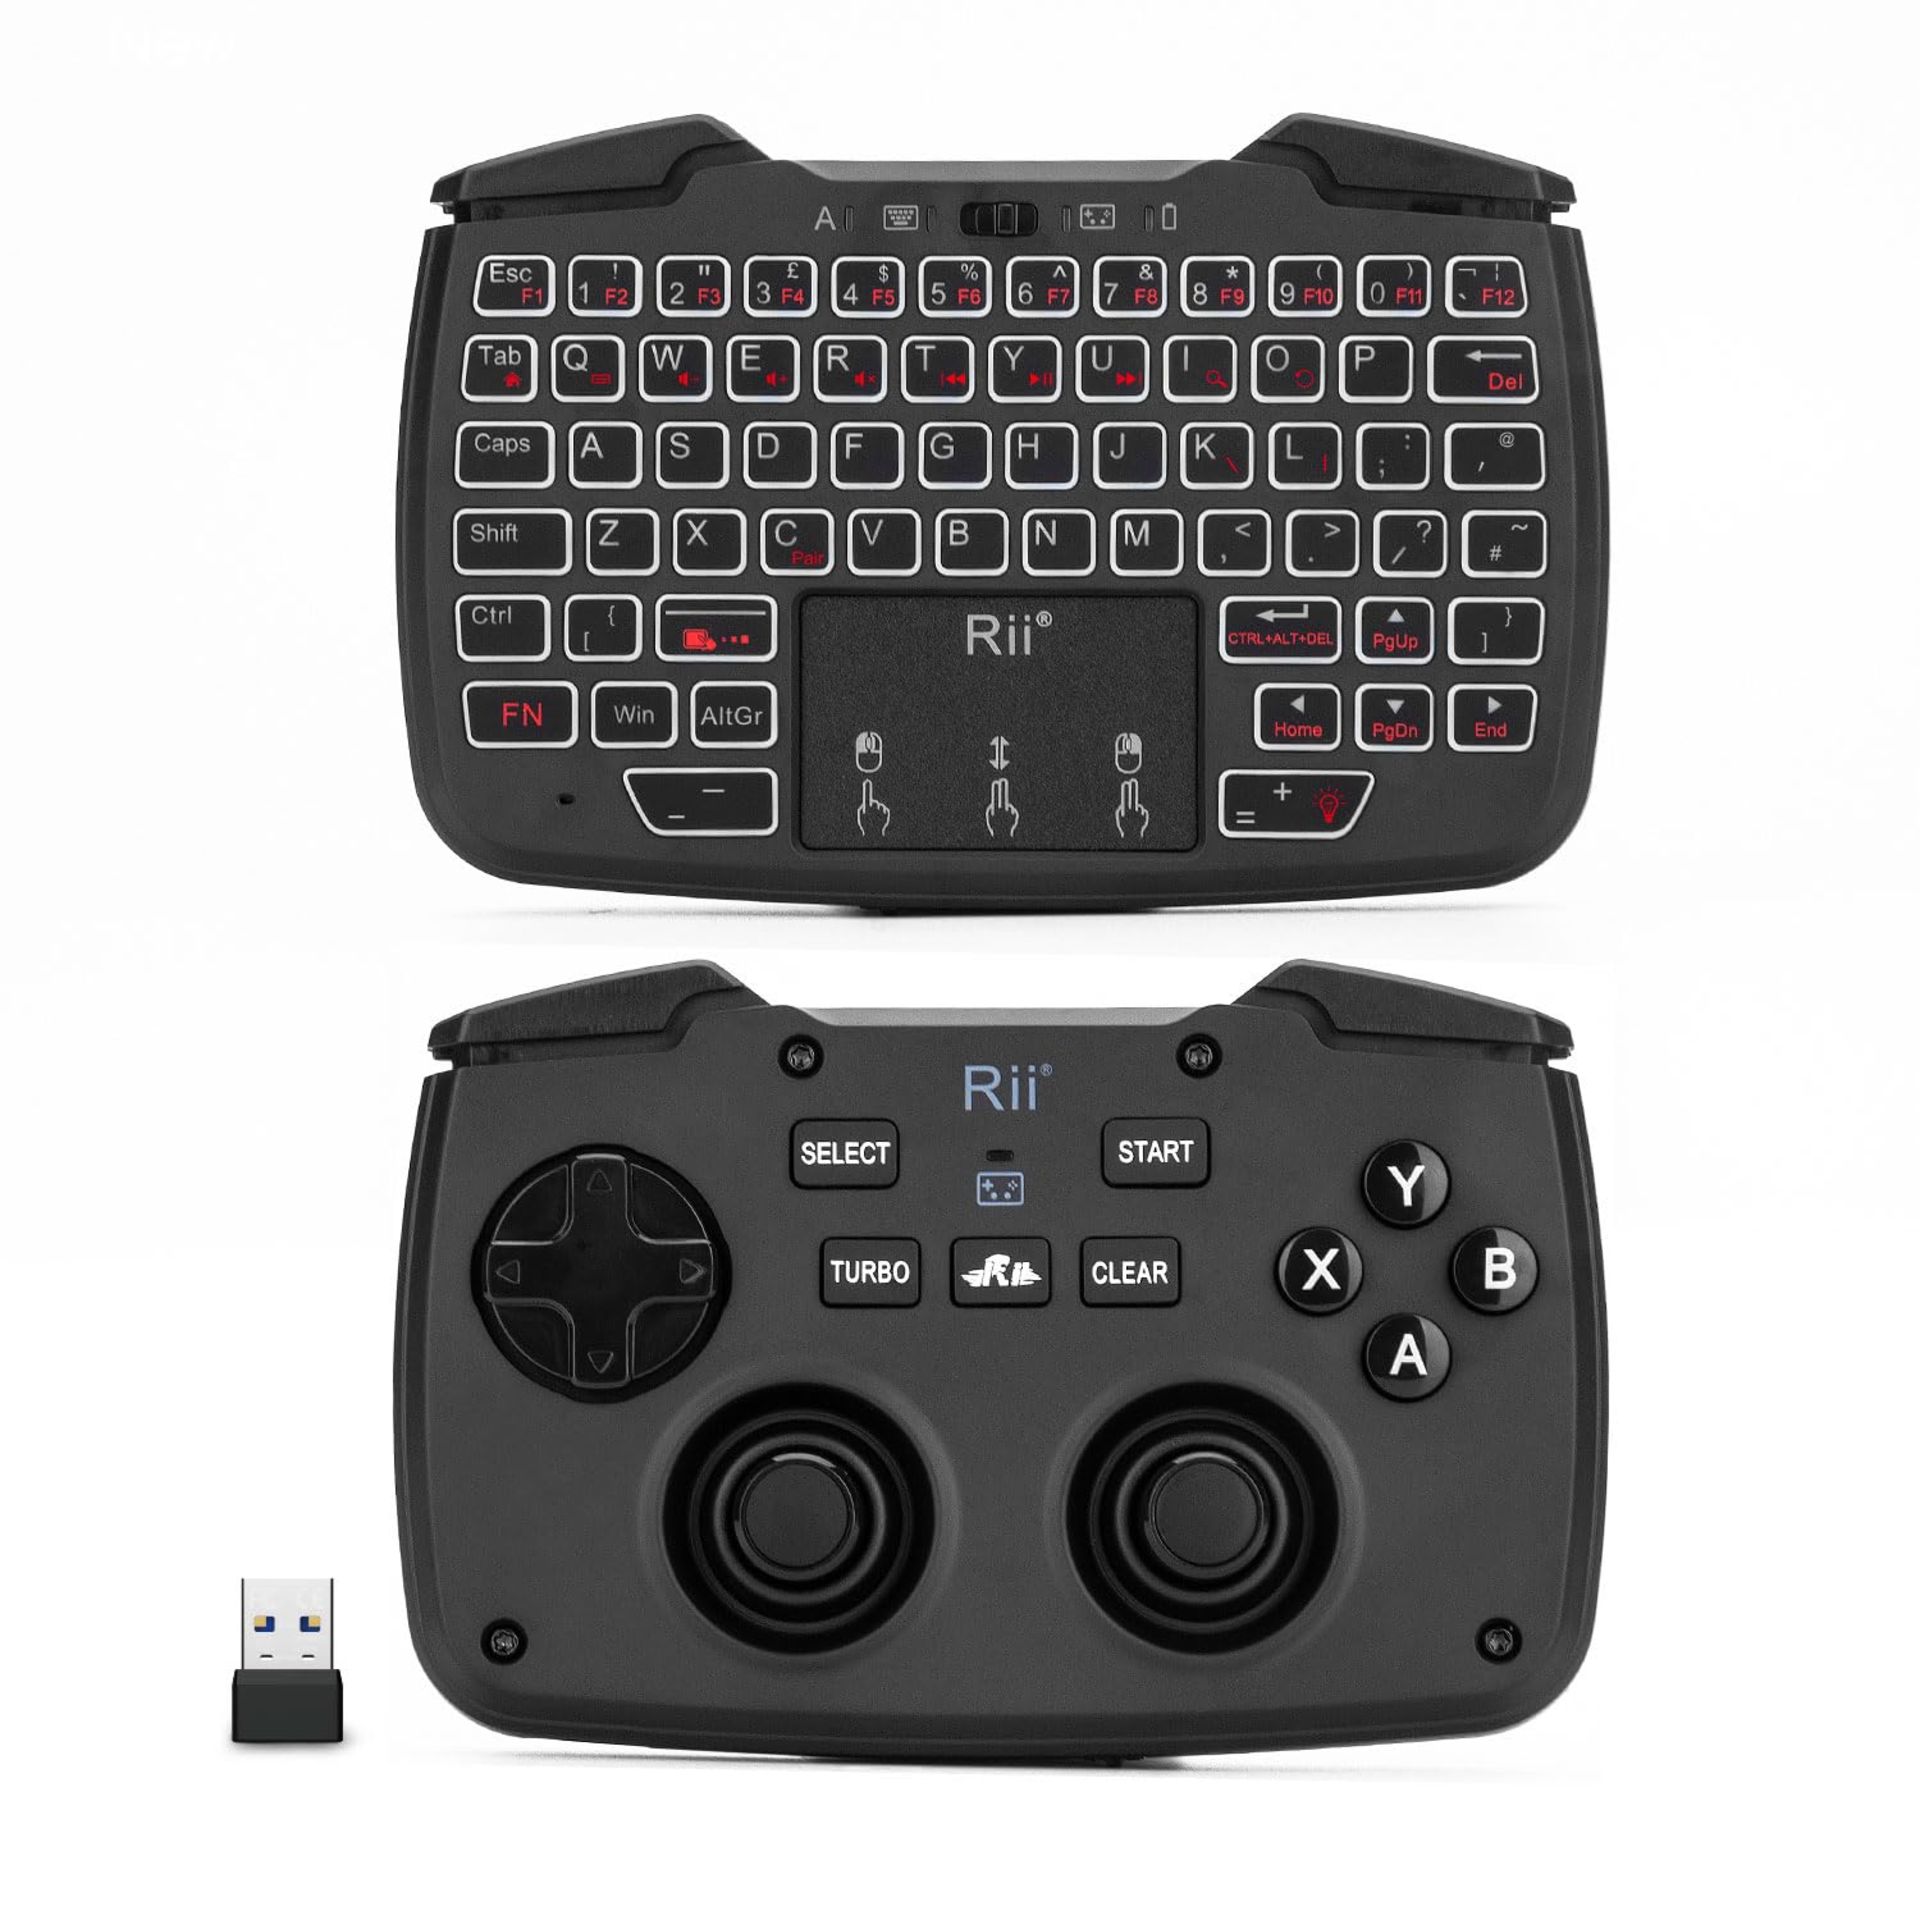 RRP £33.10 Rii RK707 Mini Keyboard and Mouse Combo with Trackpad